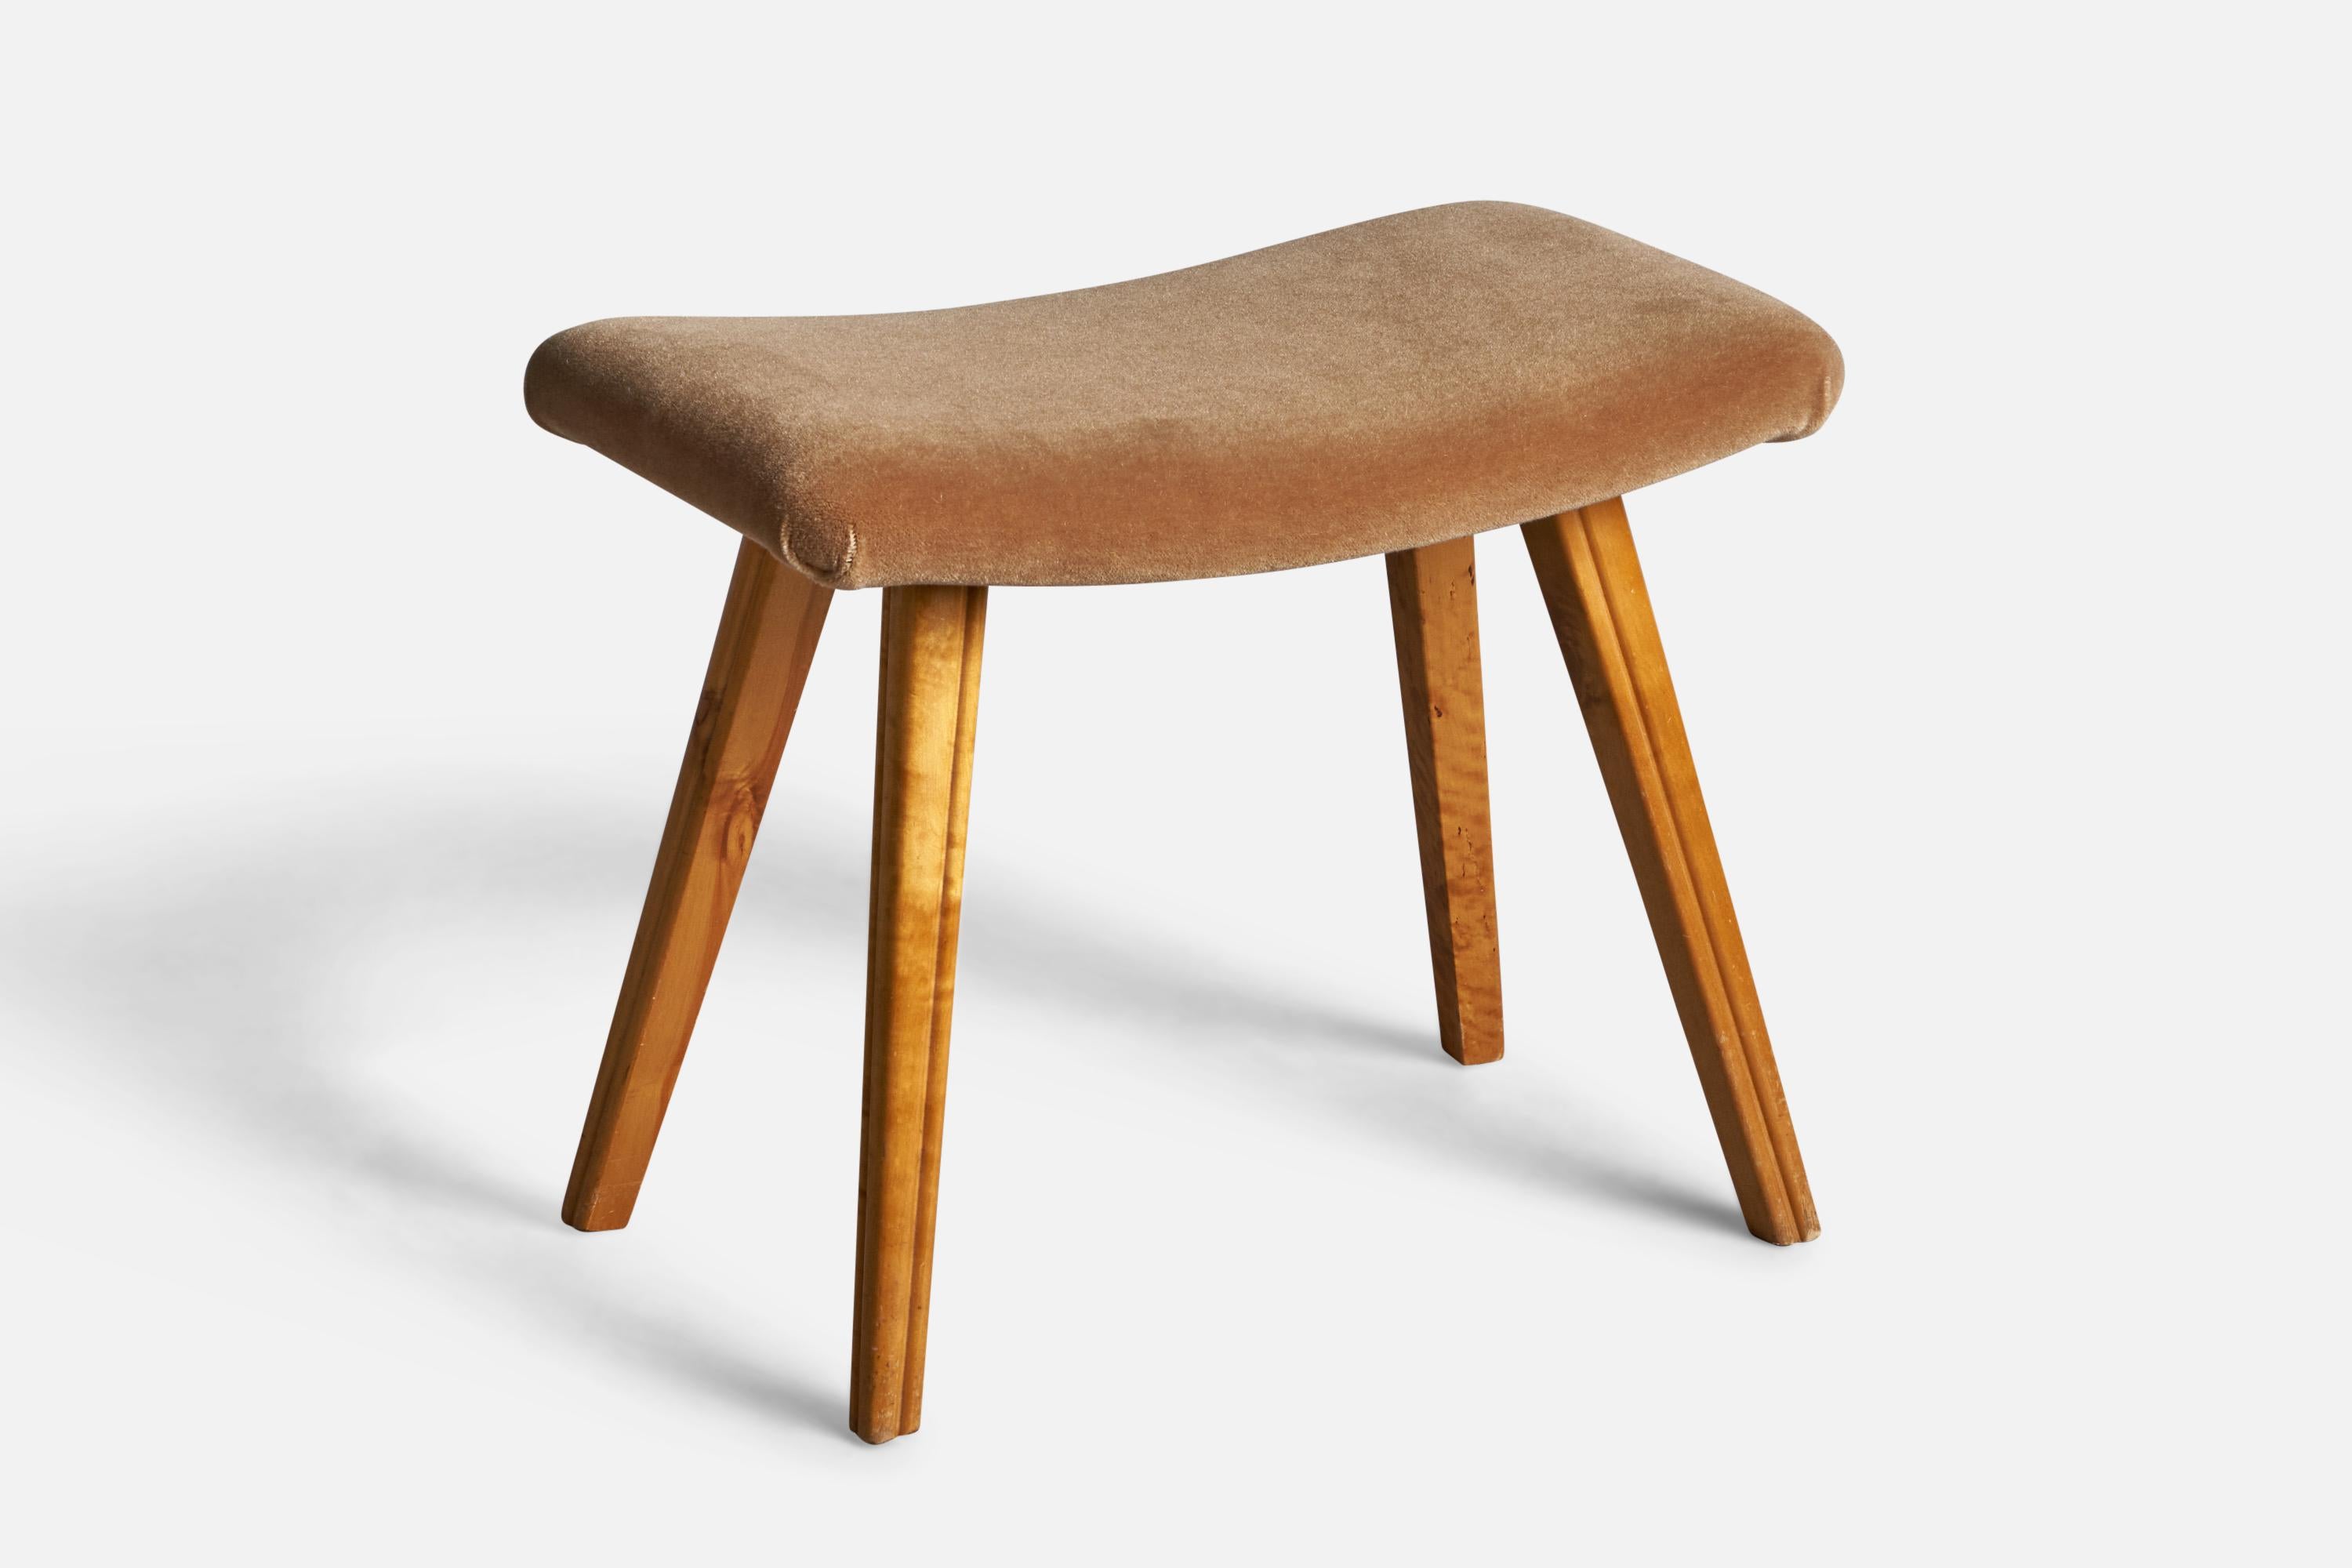 A birch and beige mohair stool, designed and produced in Sweden, 1940s.
